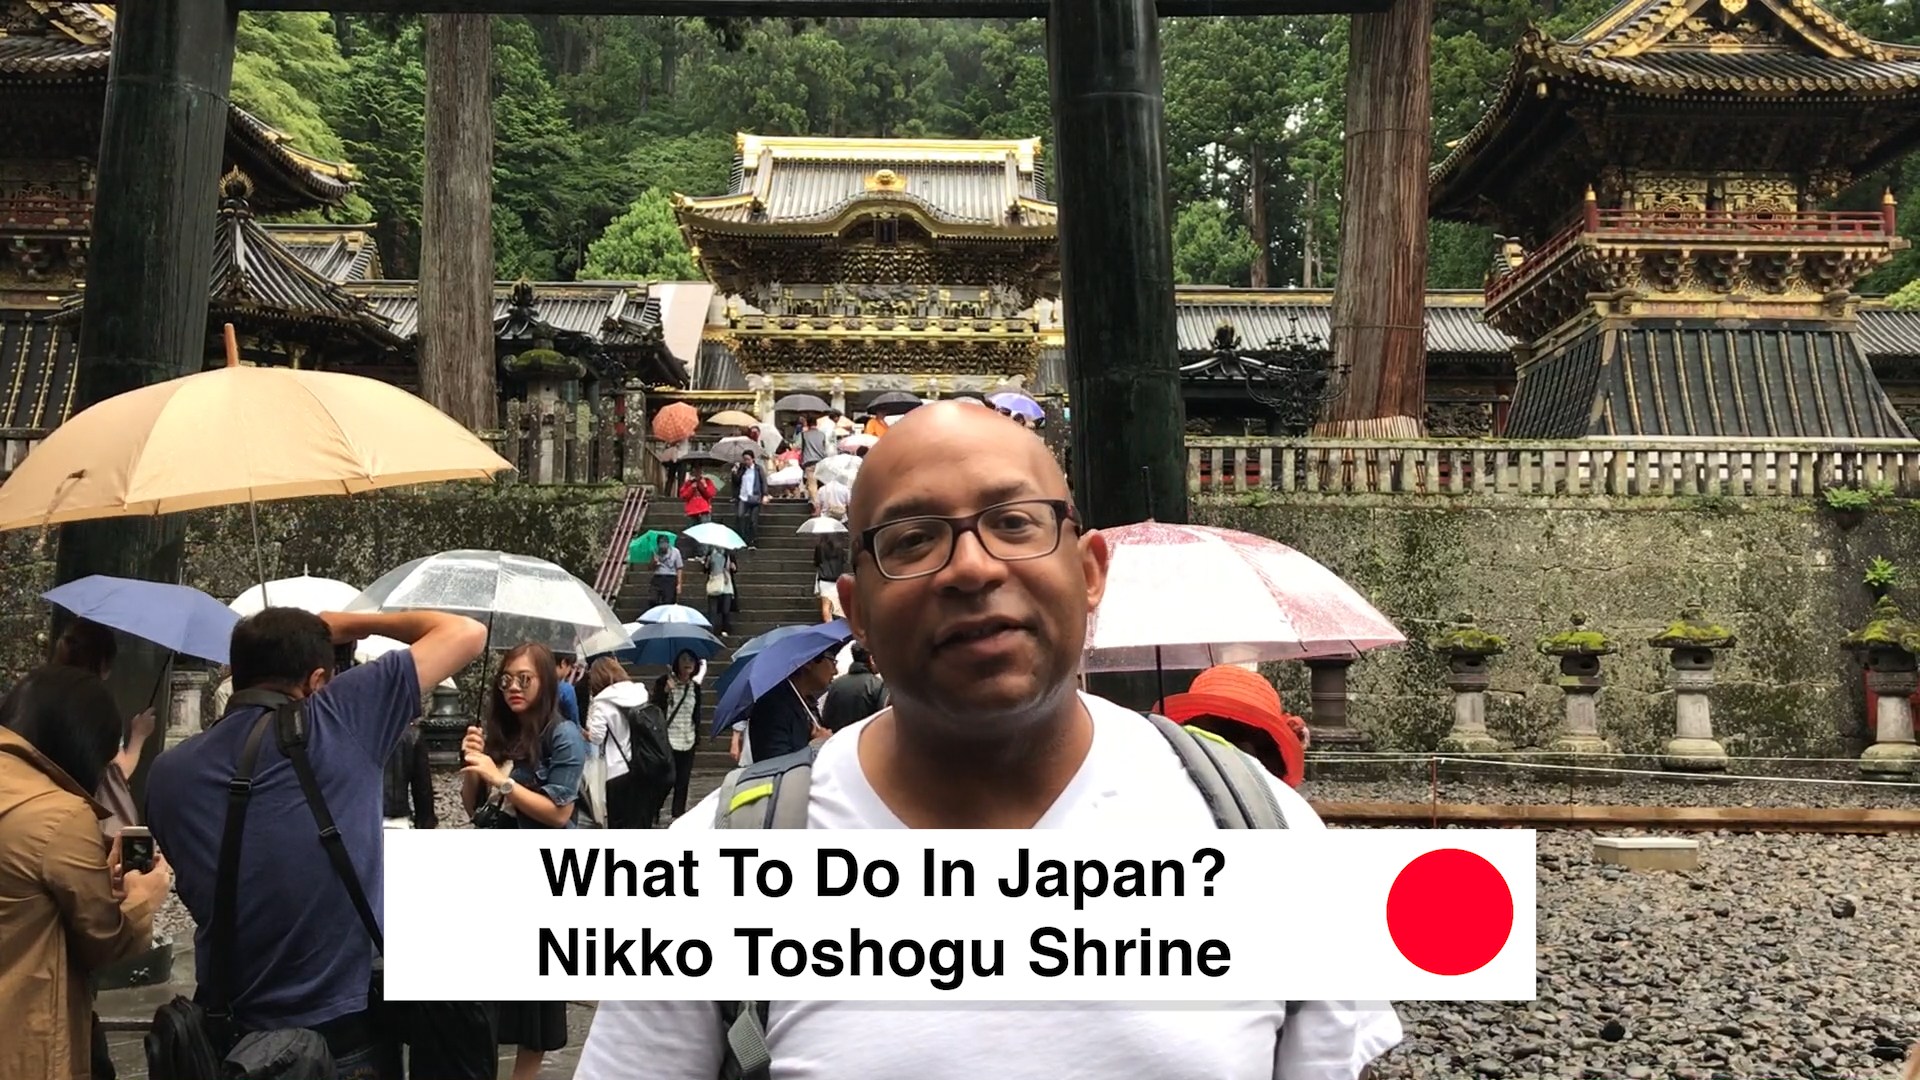 What To Do In Japan - Nikko Toshogu Shrine Japan Review Blog Guide List View Video 2017 ⛩ 🏯 🌸